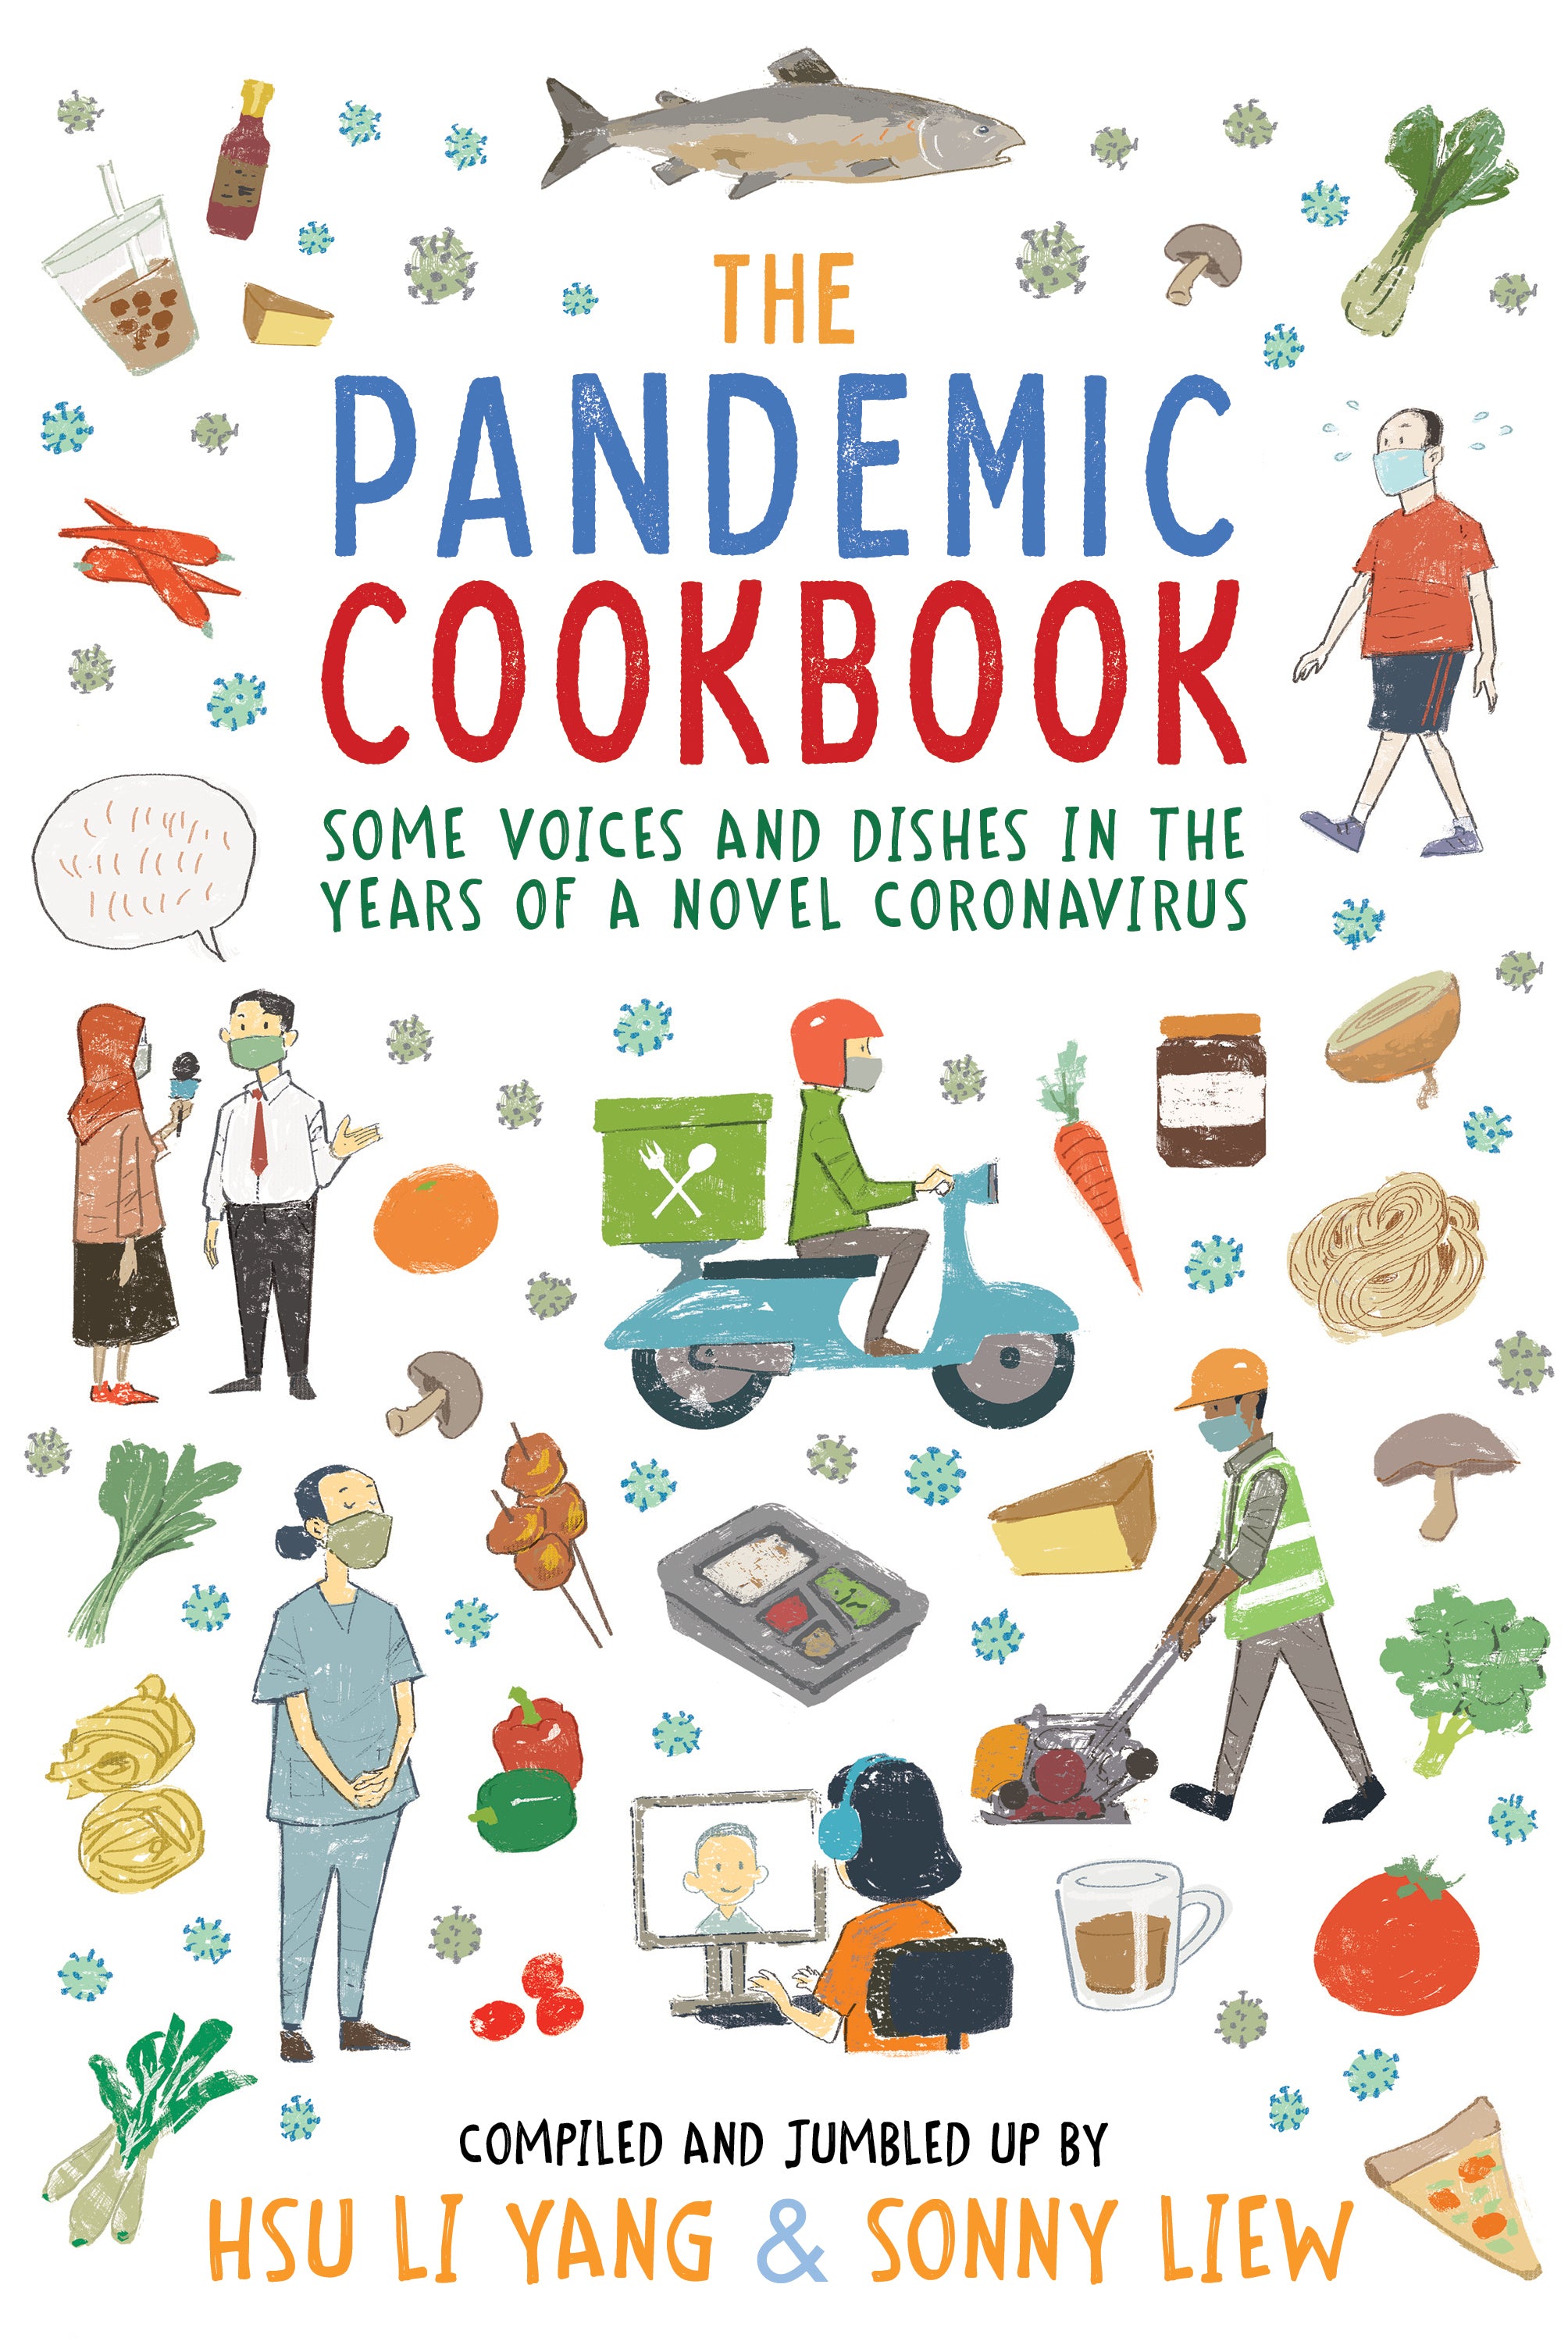 The Pandemic Cookbook